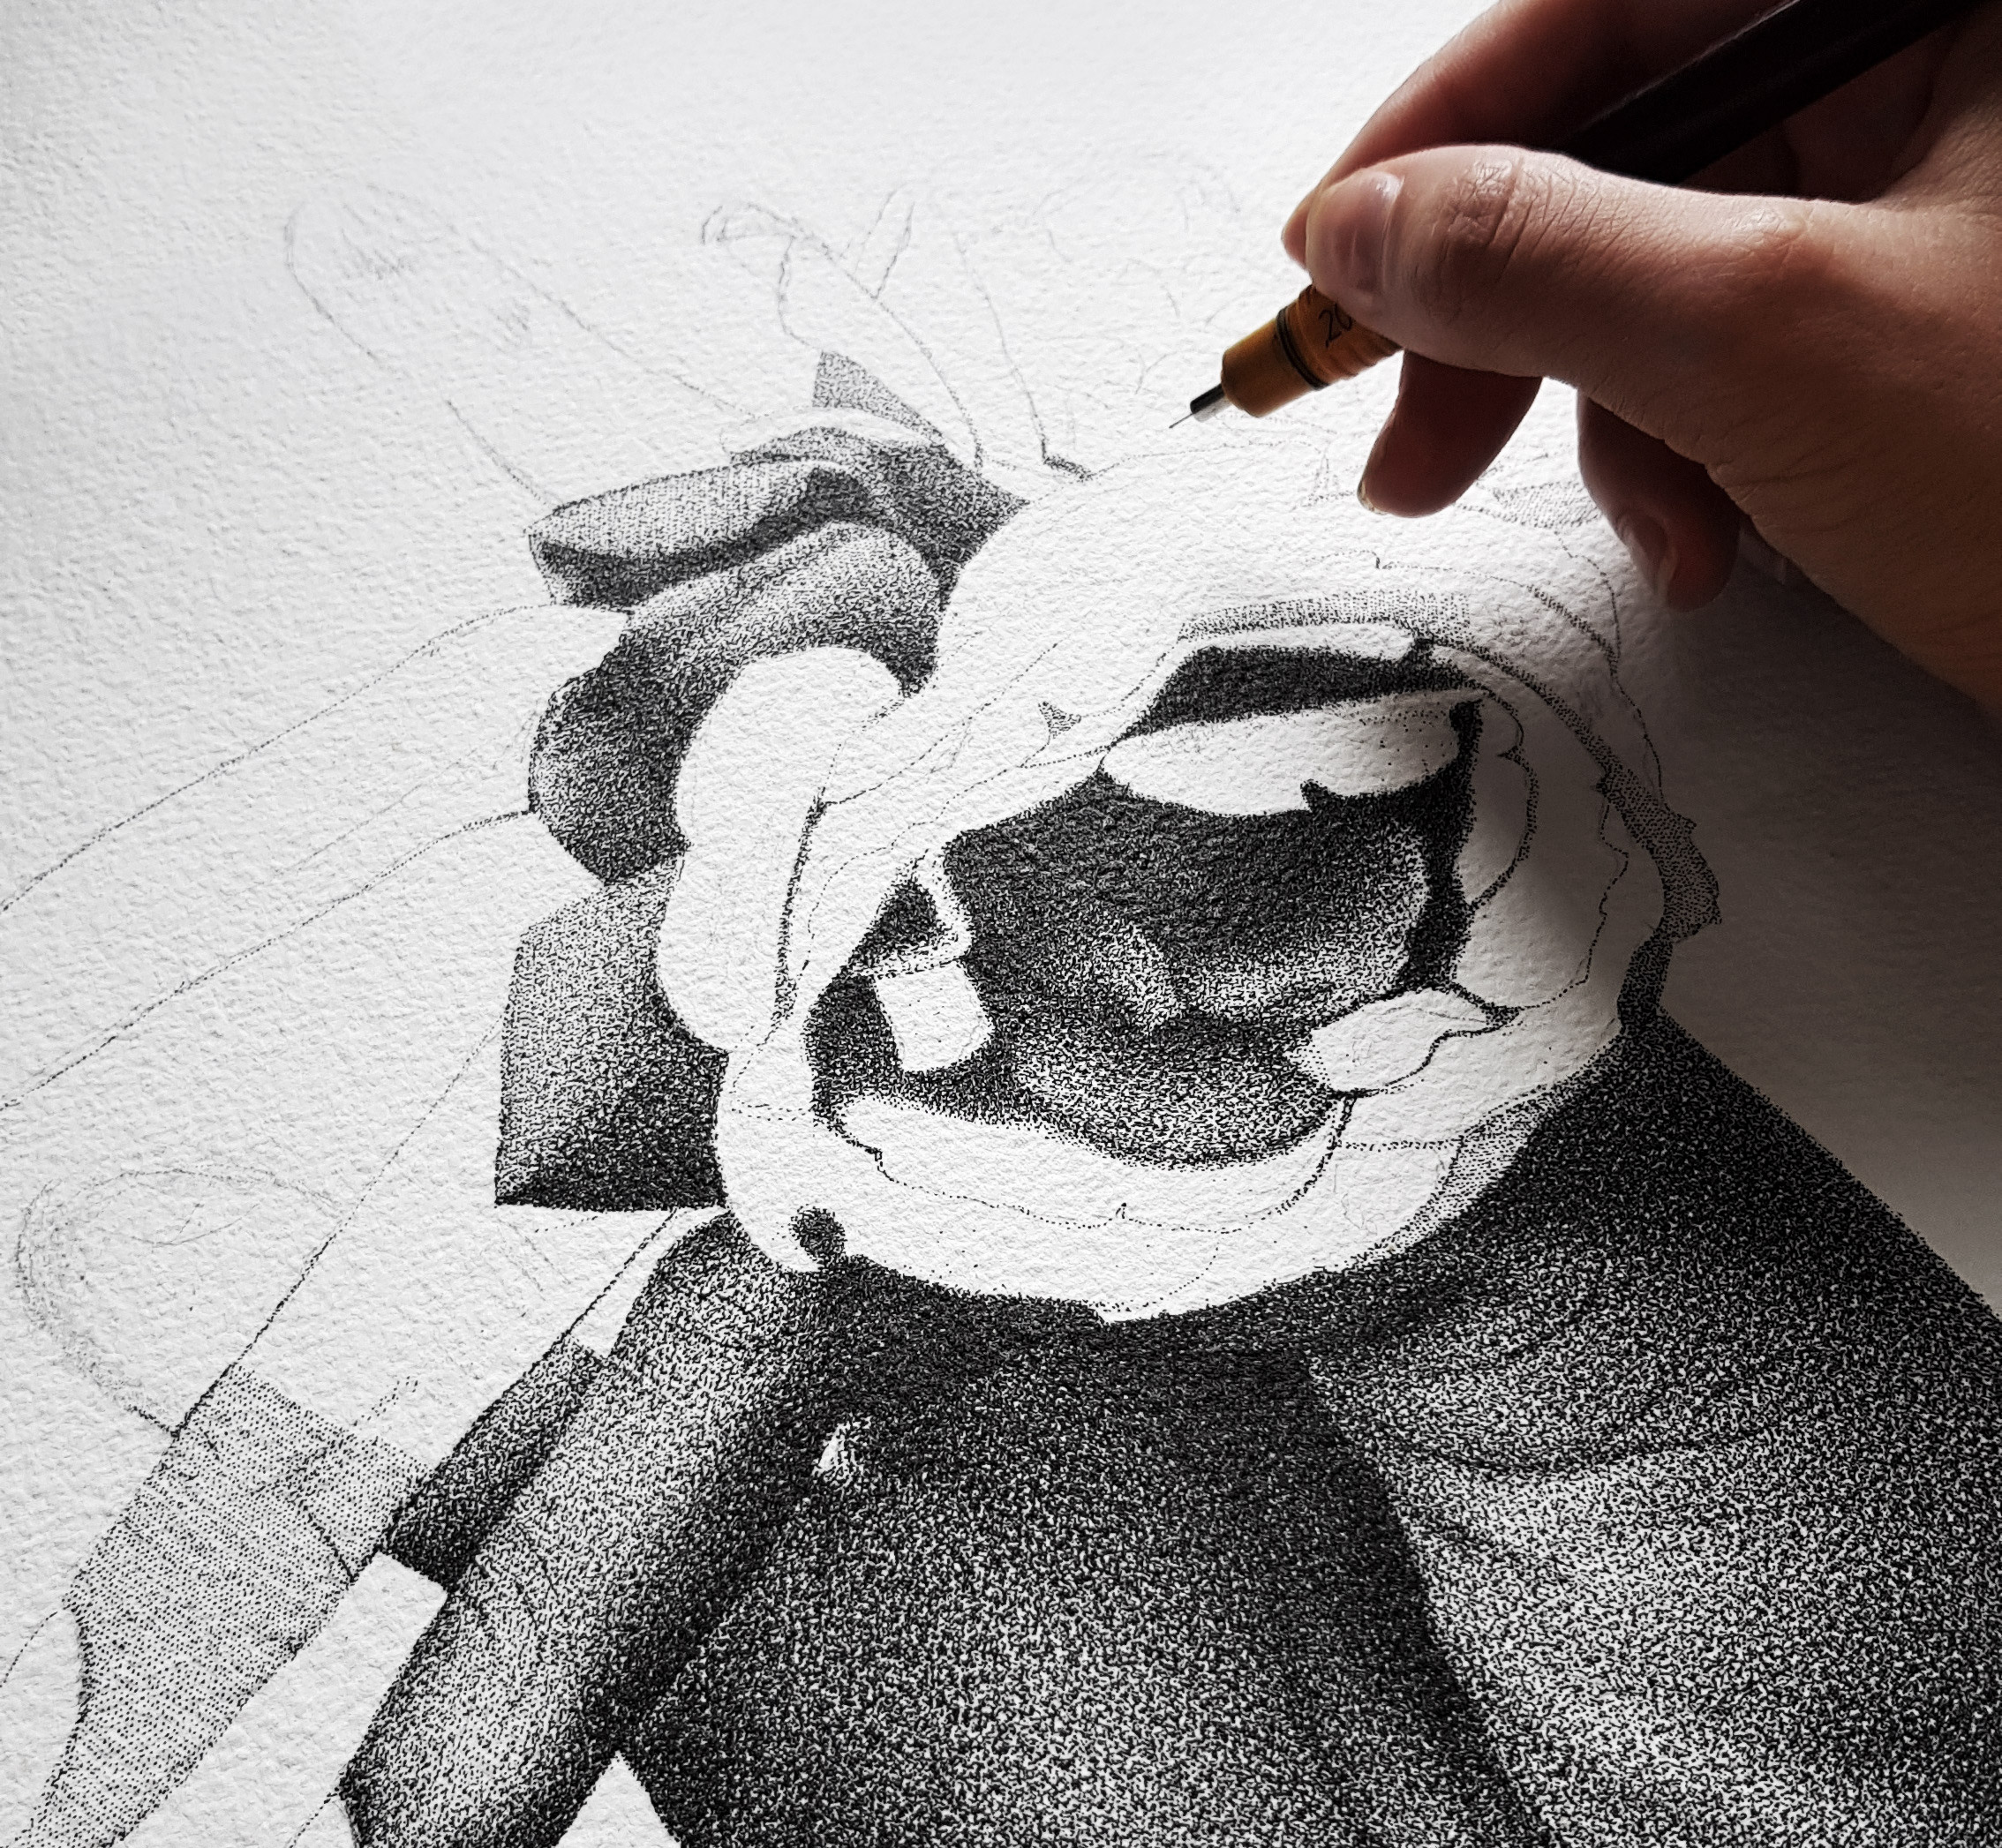 How to use the stippling technique when drawing #drawingtips #stipplin